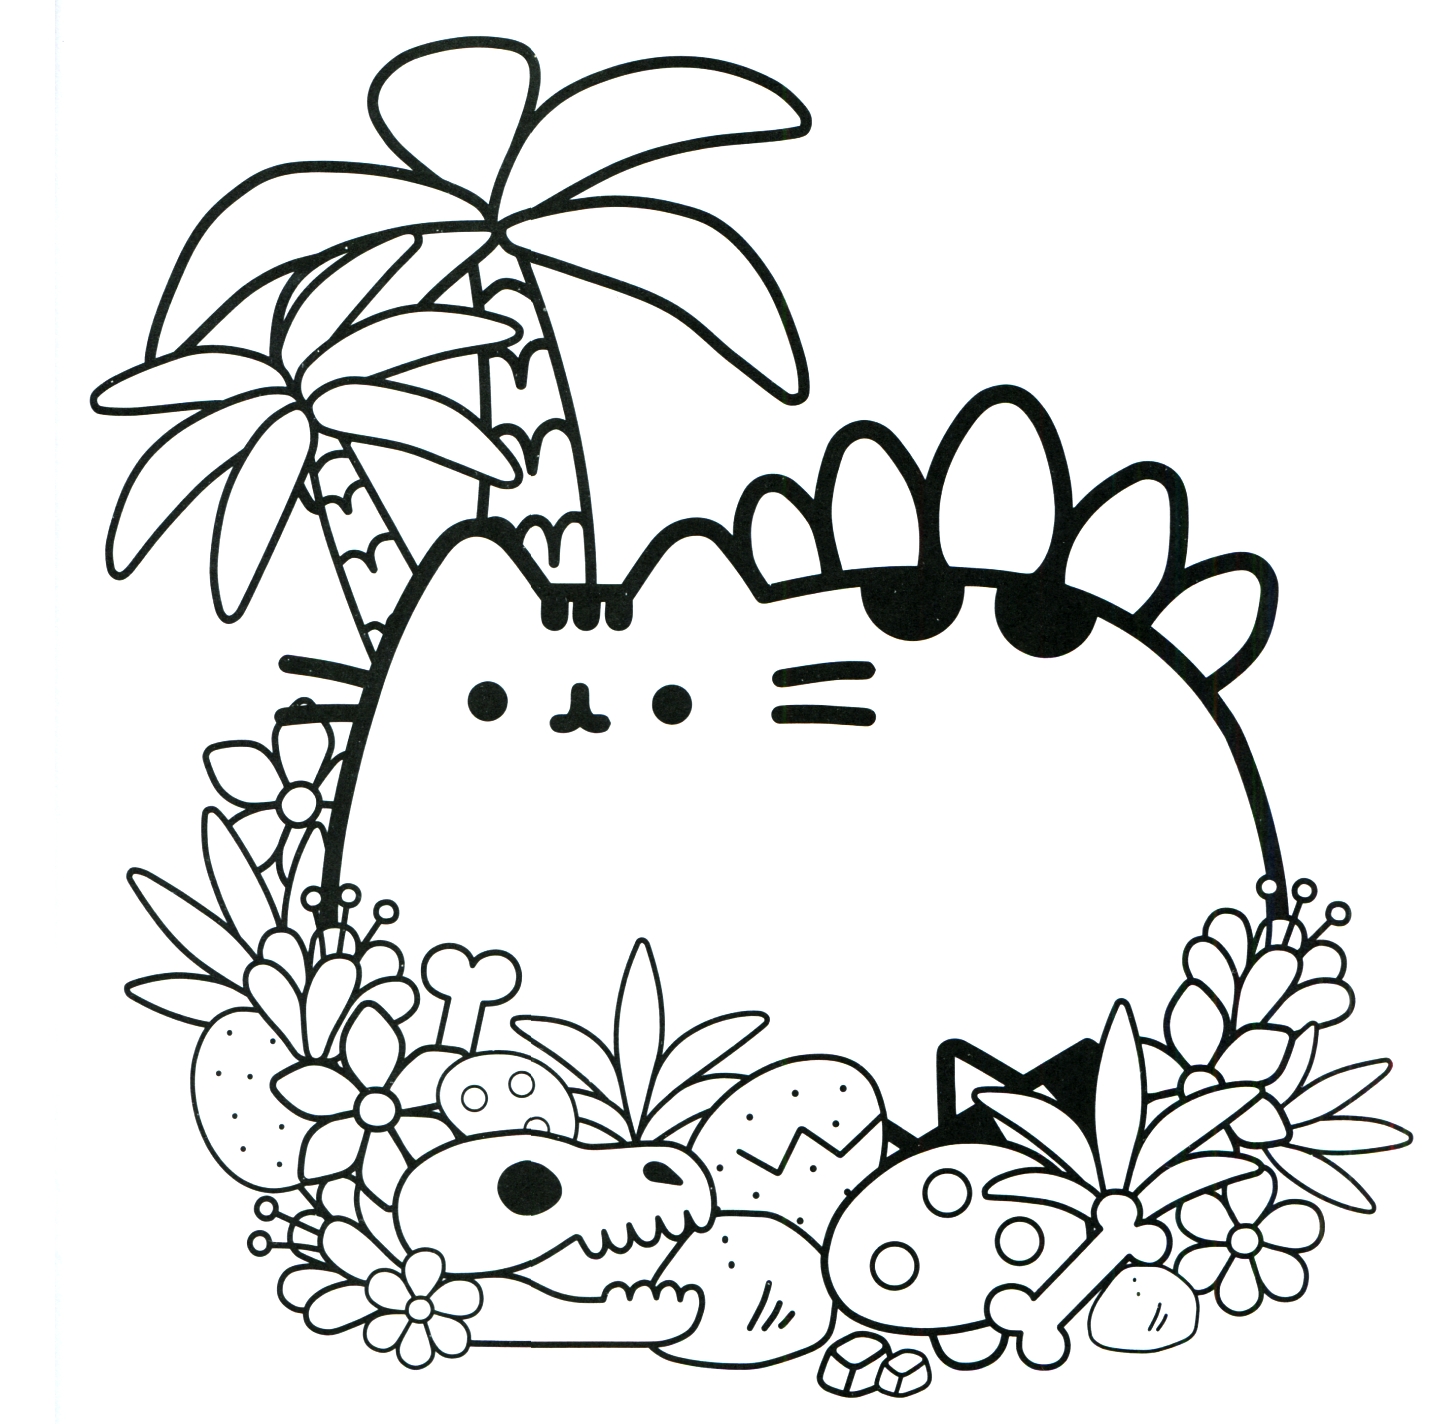 Pusheen Coloring Pages at GetColorings.com | Free printable colorings ...